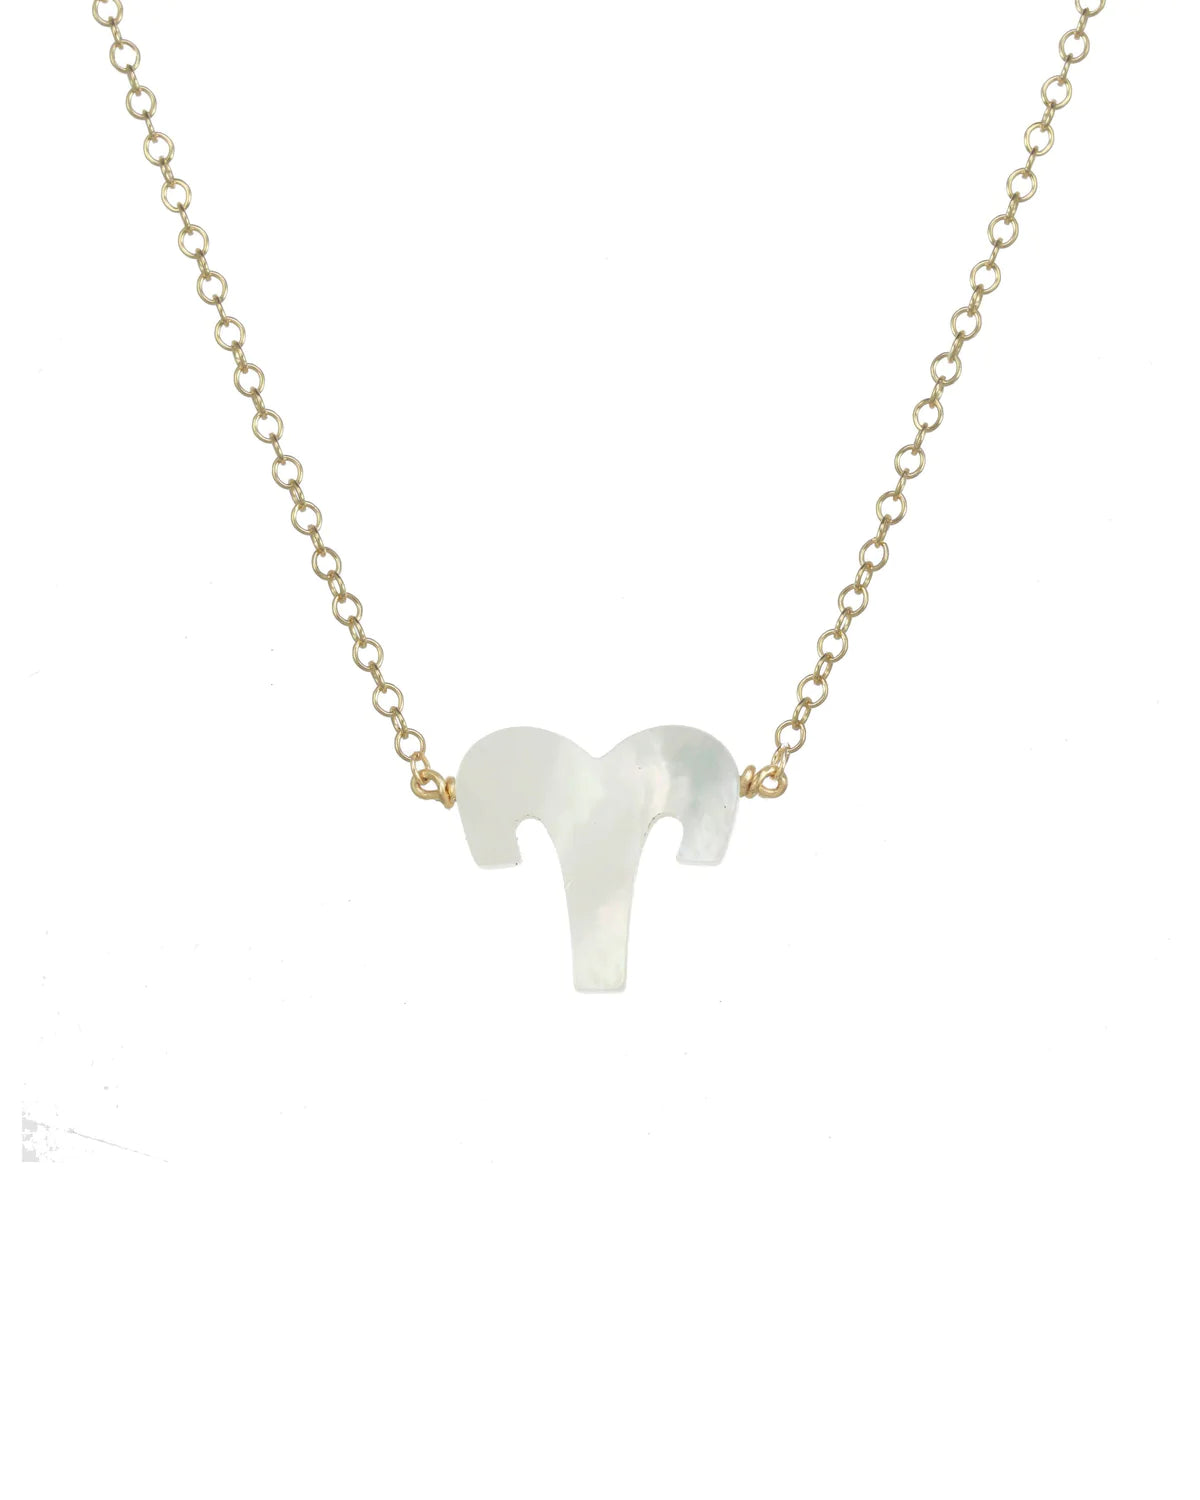 Aries Necklace in MOP/Gold